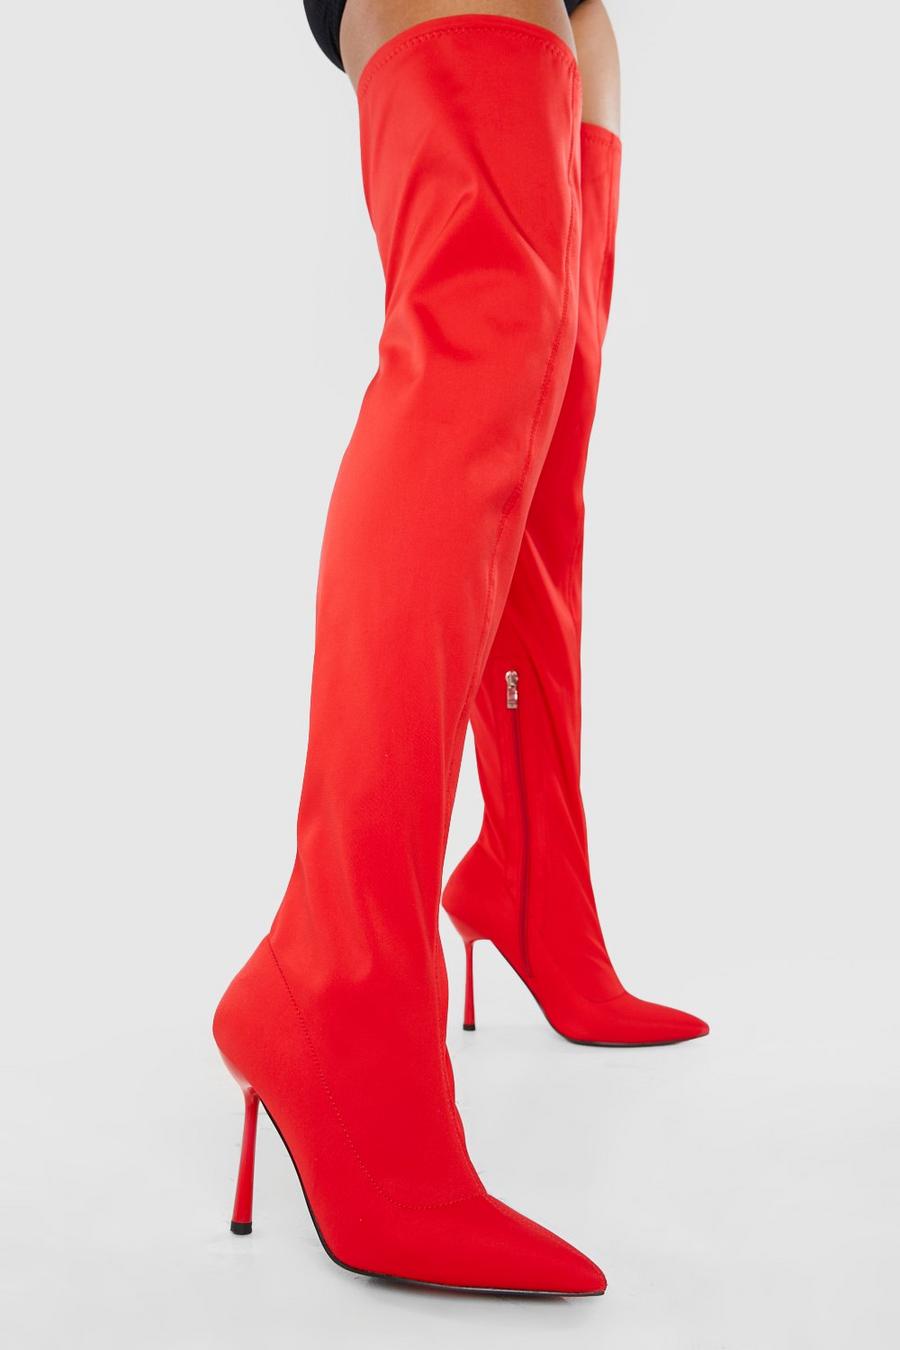 Red rot Stretch Neoprene Thigh High Stiletto Boots